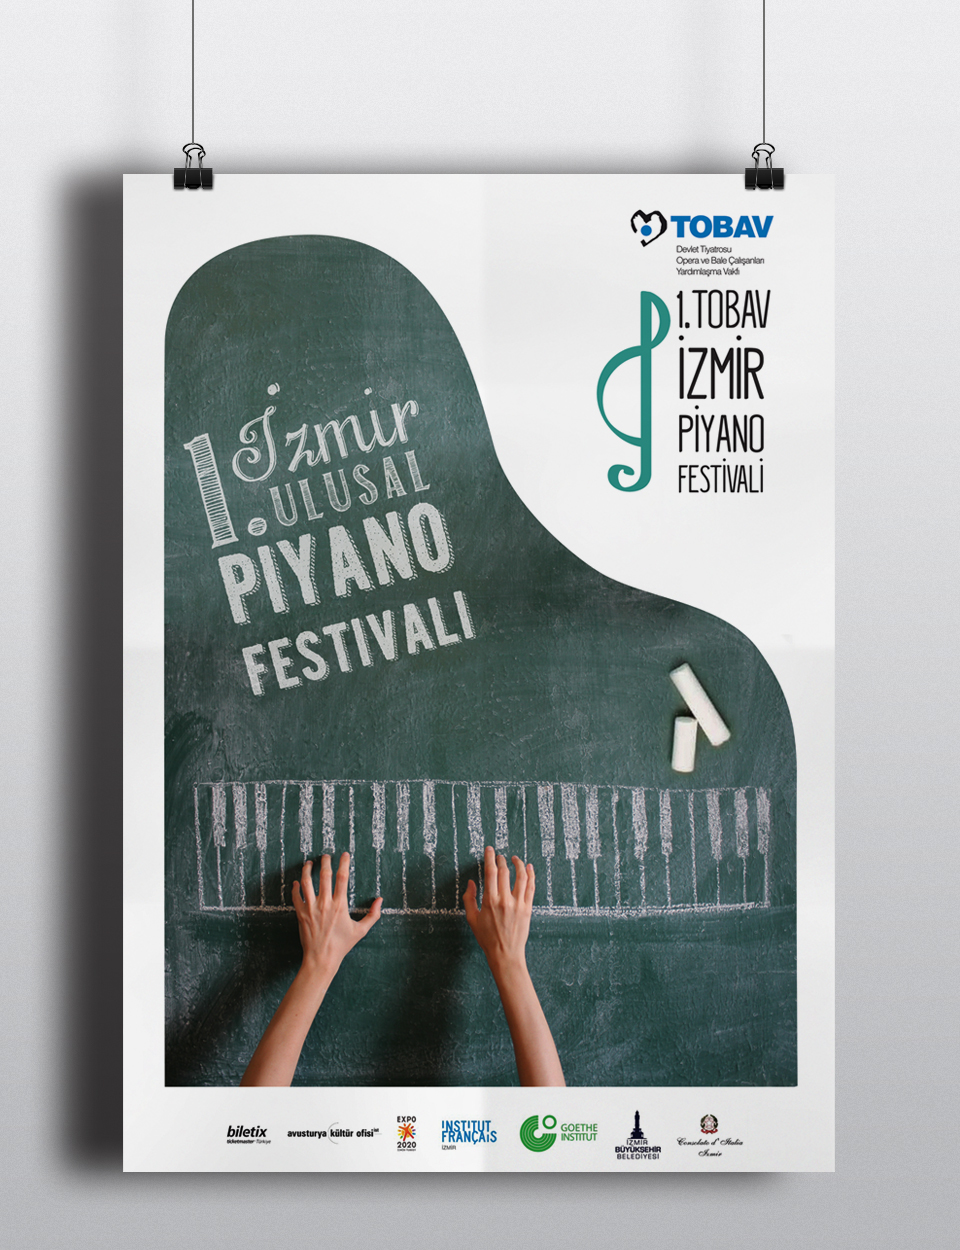 Piano festival free student musician feathers books Board hands instruments posters mock-ups